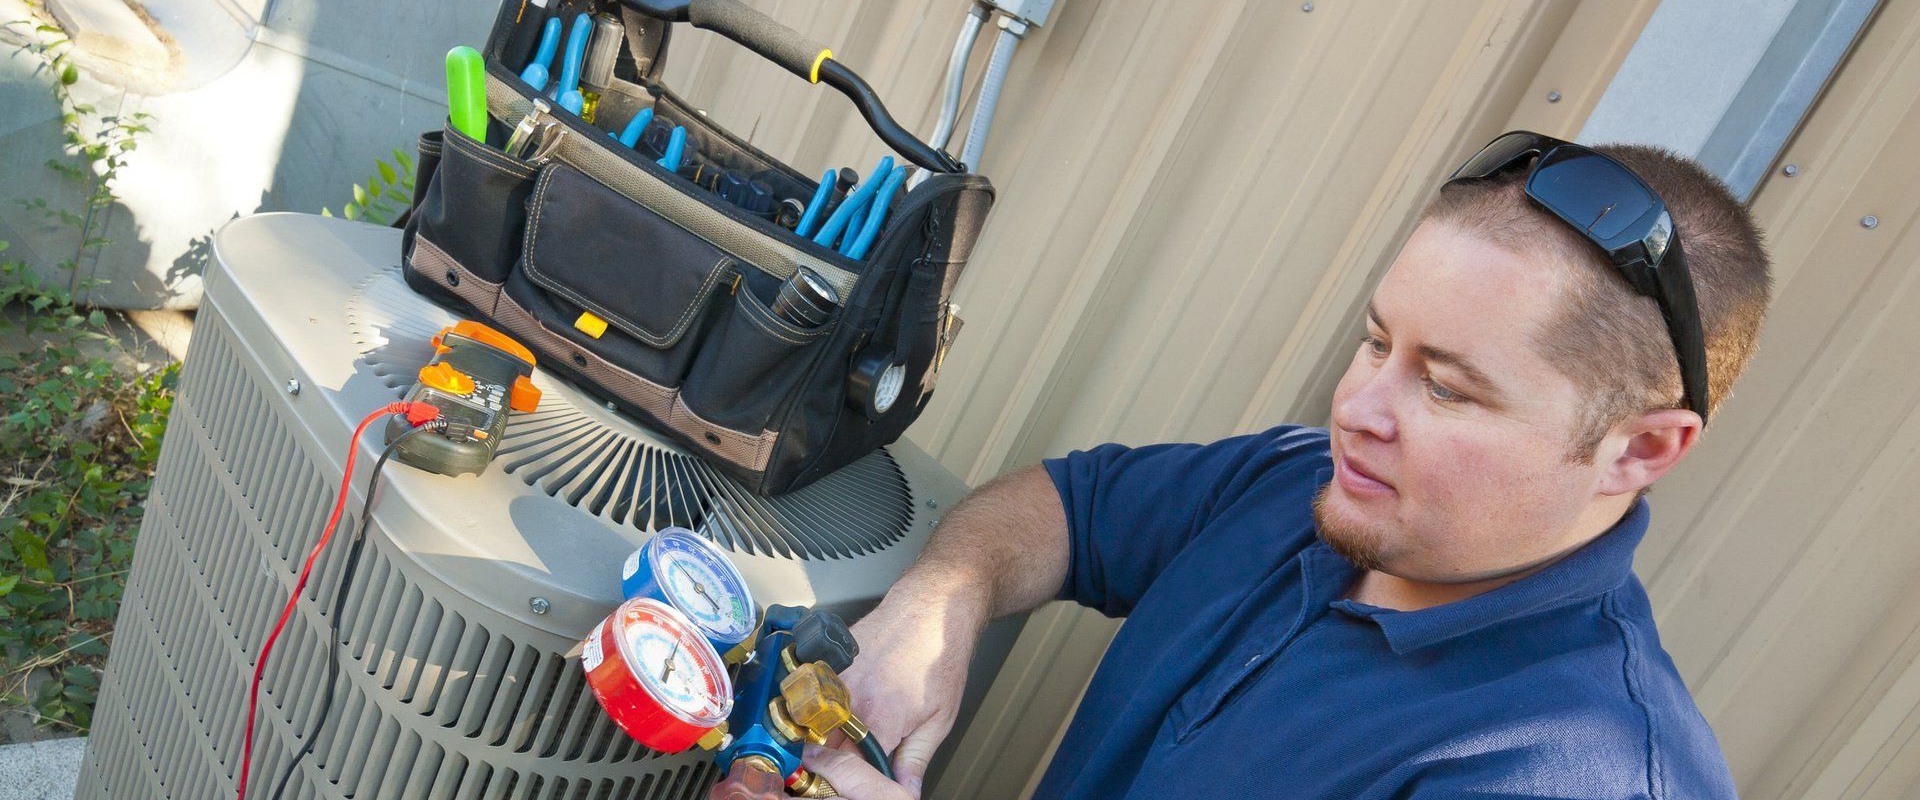 Finding a Reliable HVAC Repair Service in Coral Springs, FL